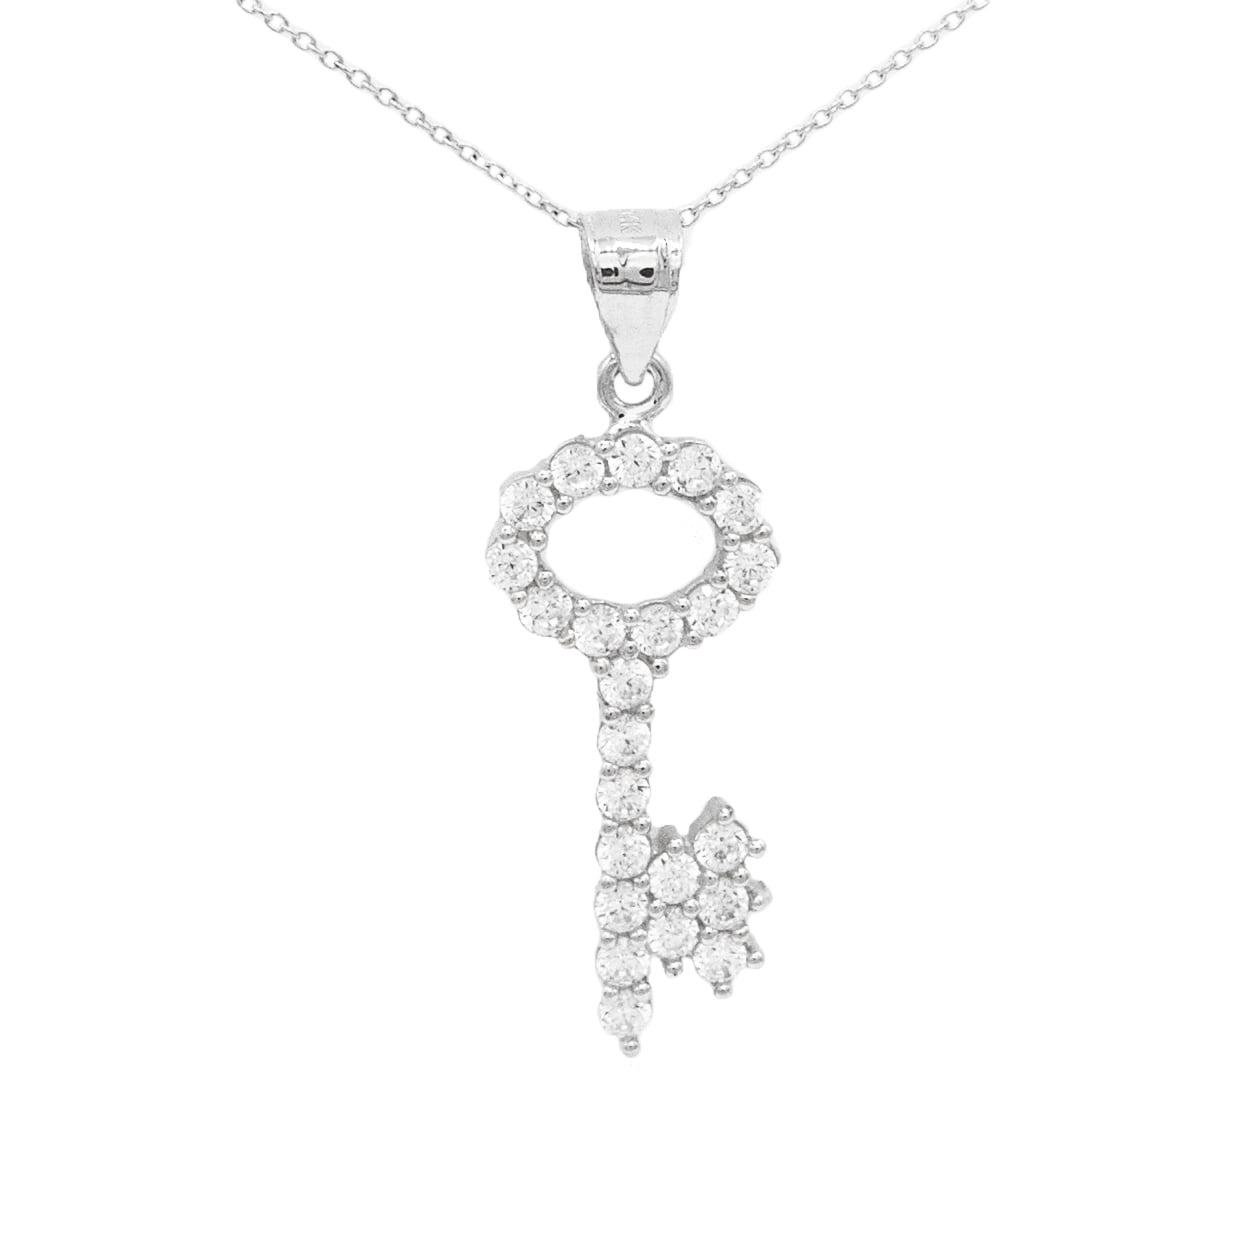 10k White Gold Cubic Zirconia Key Pendant Necklace with 16" Chain